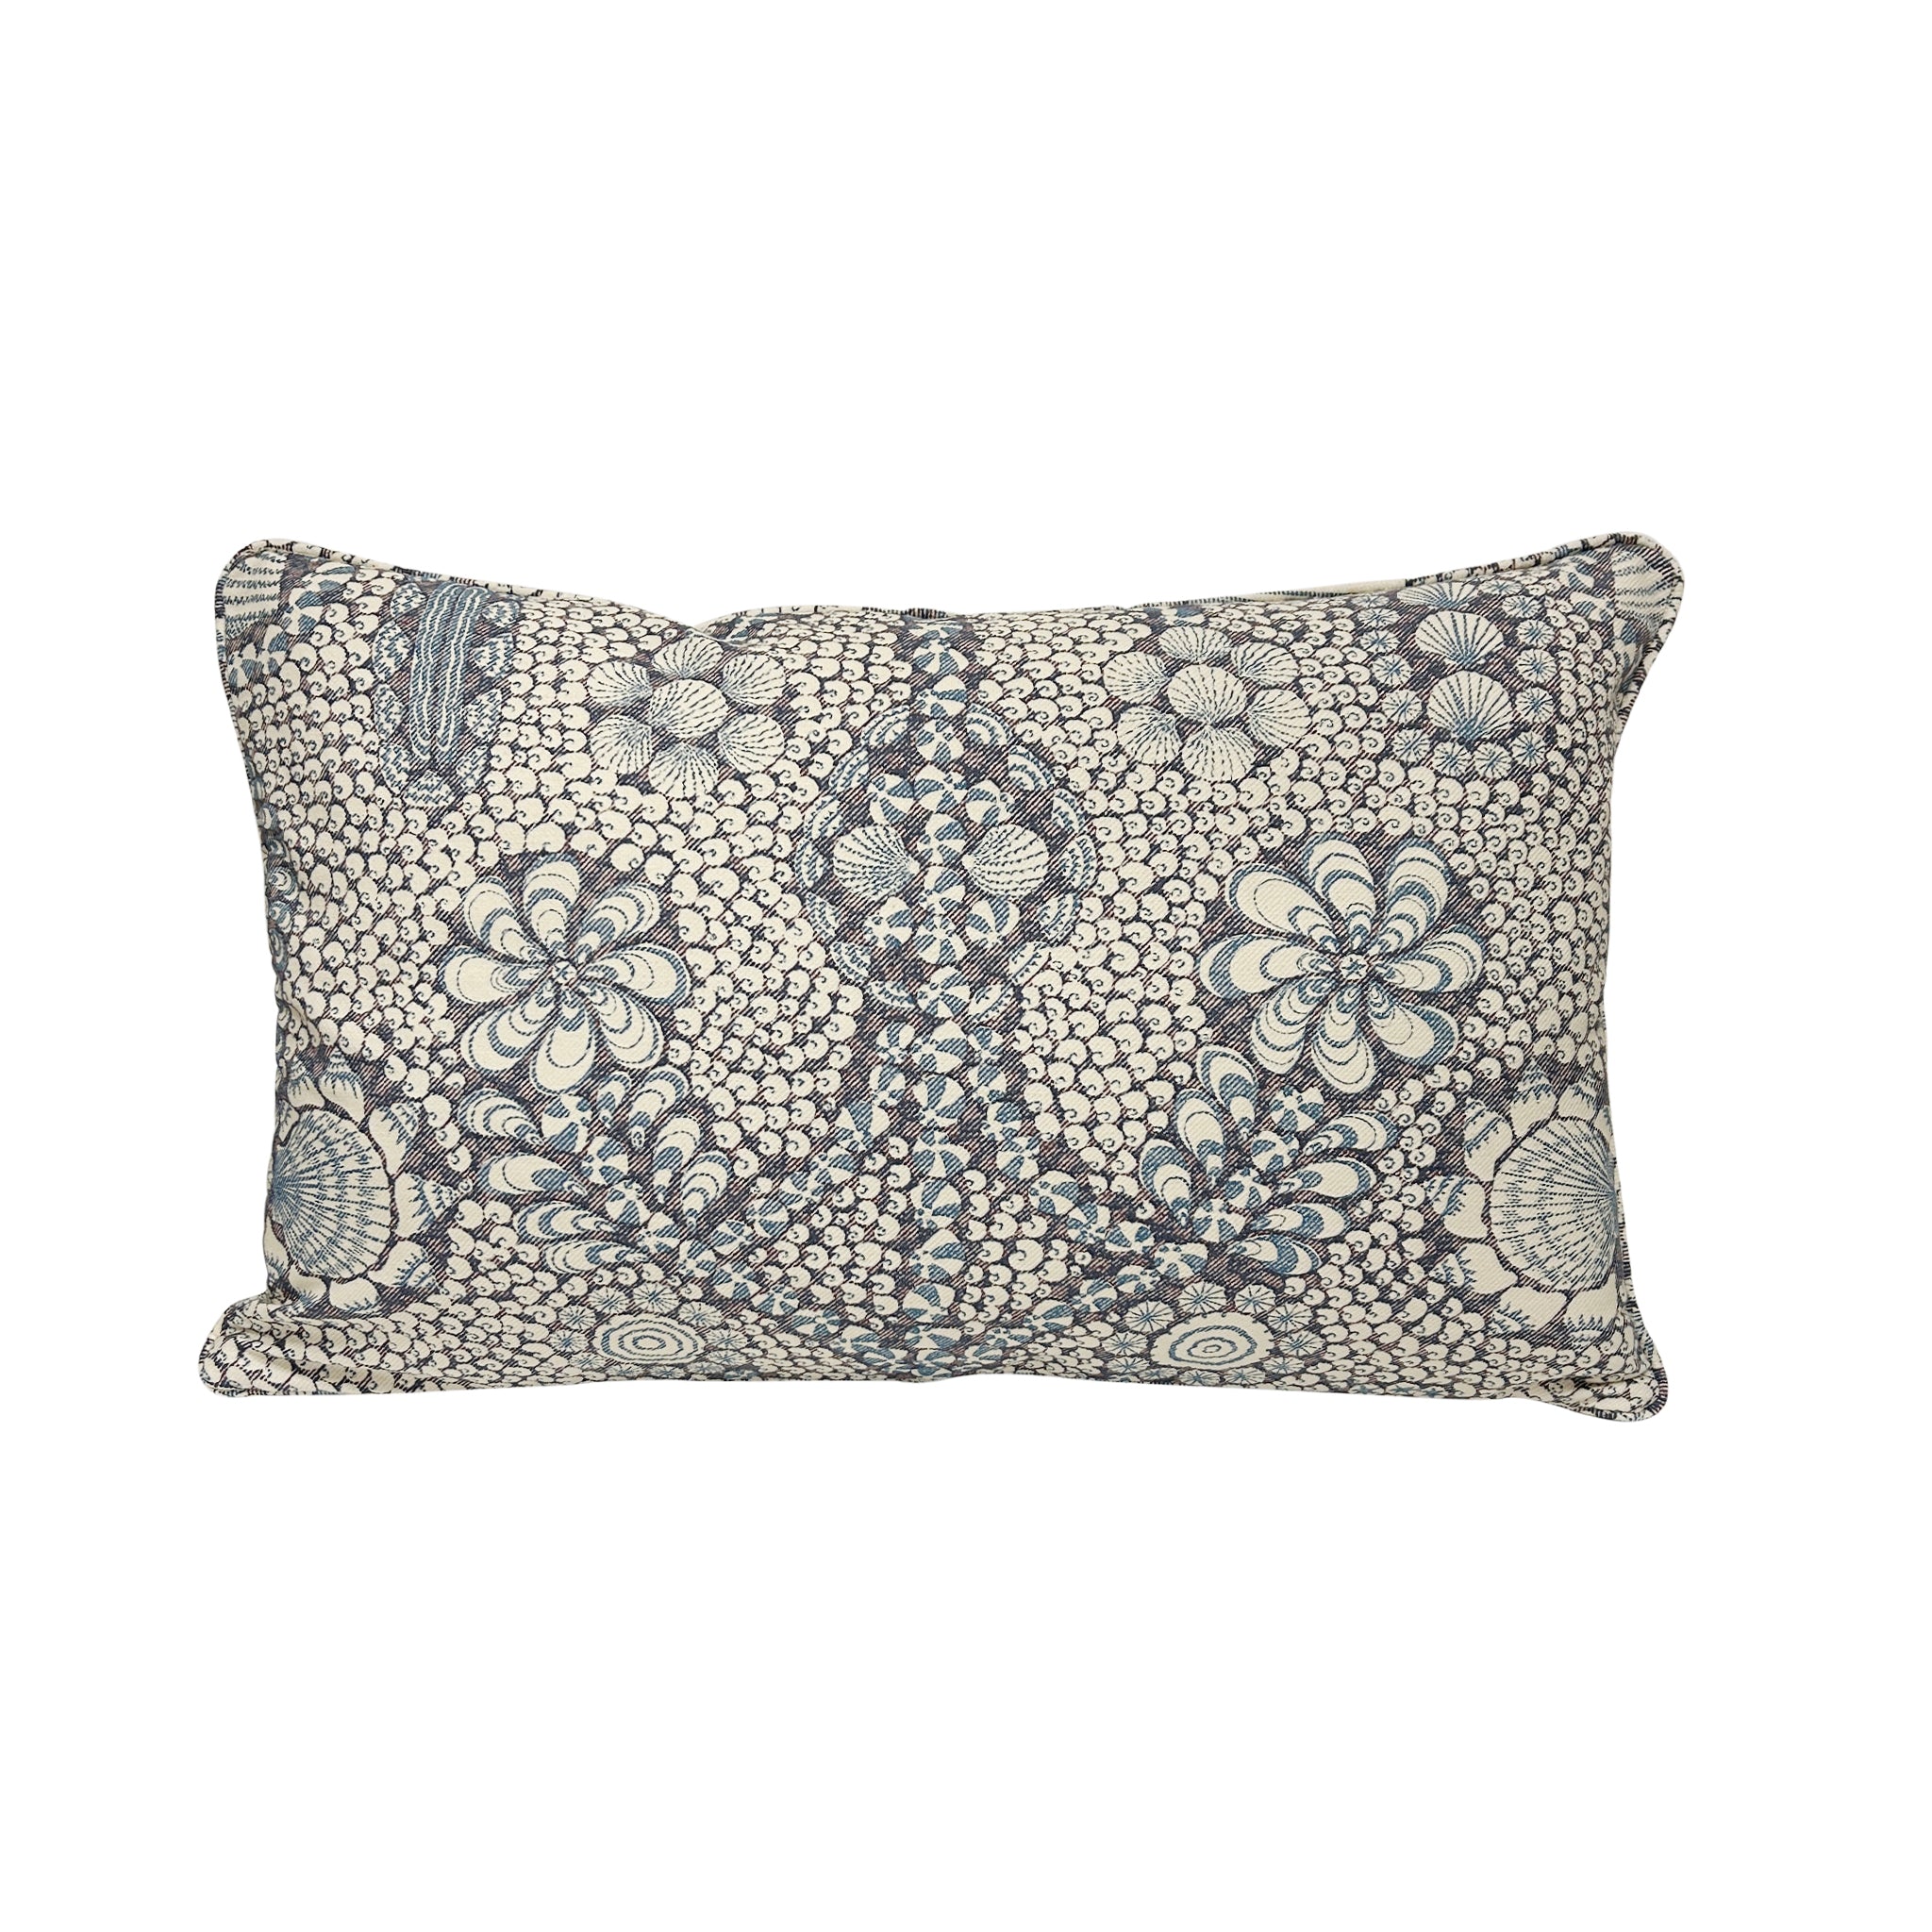 Shell Grotto Pillow